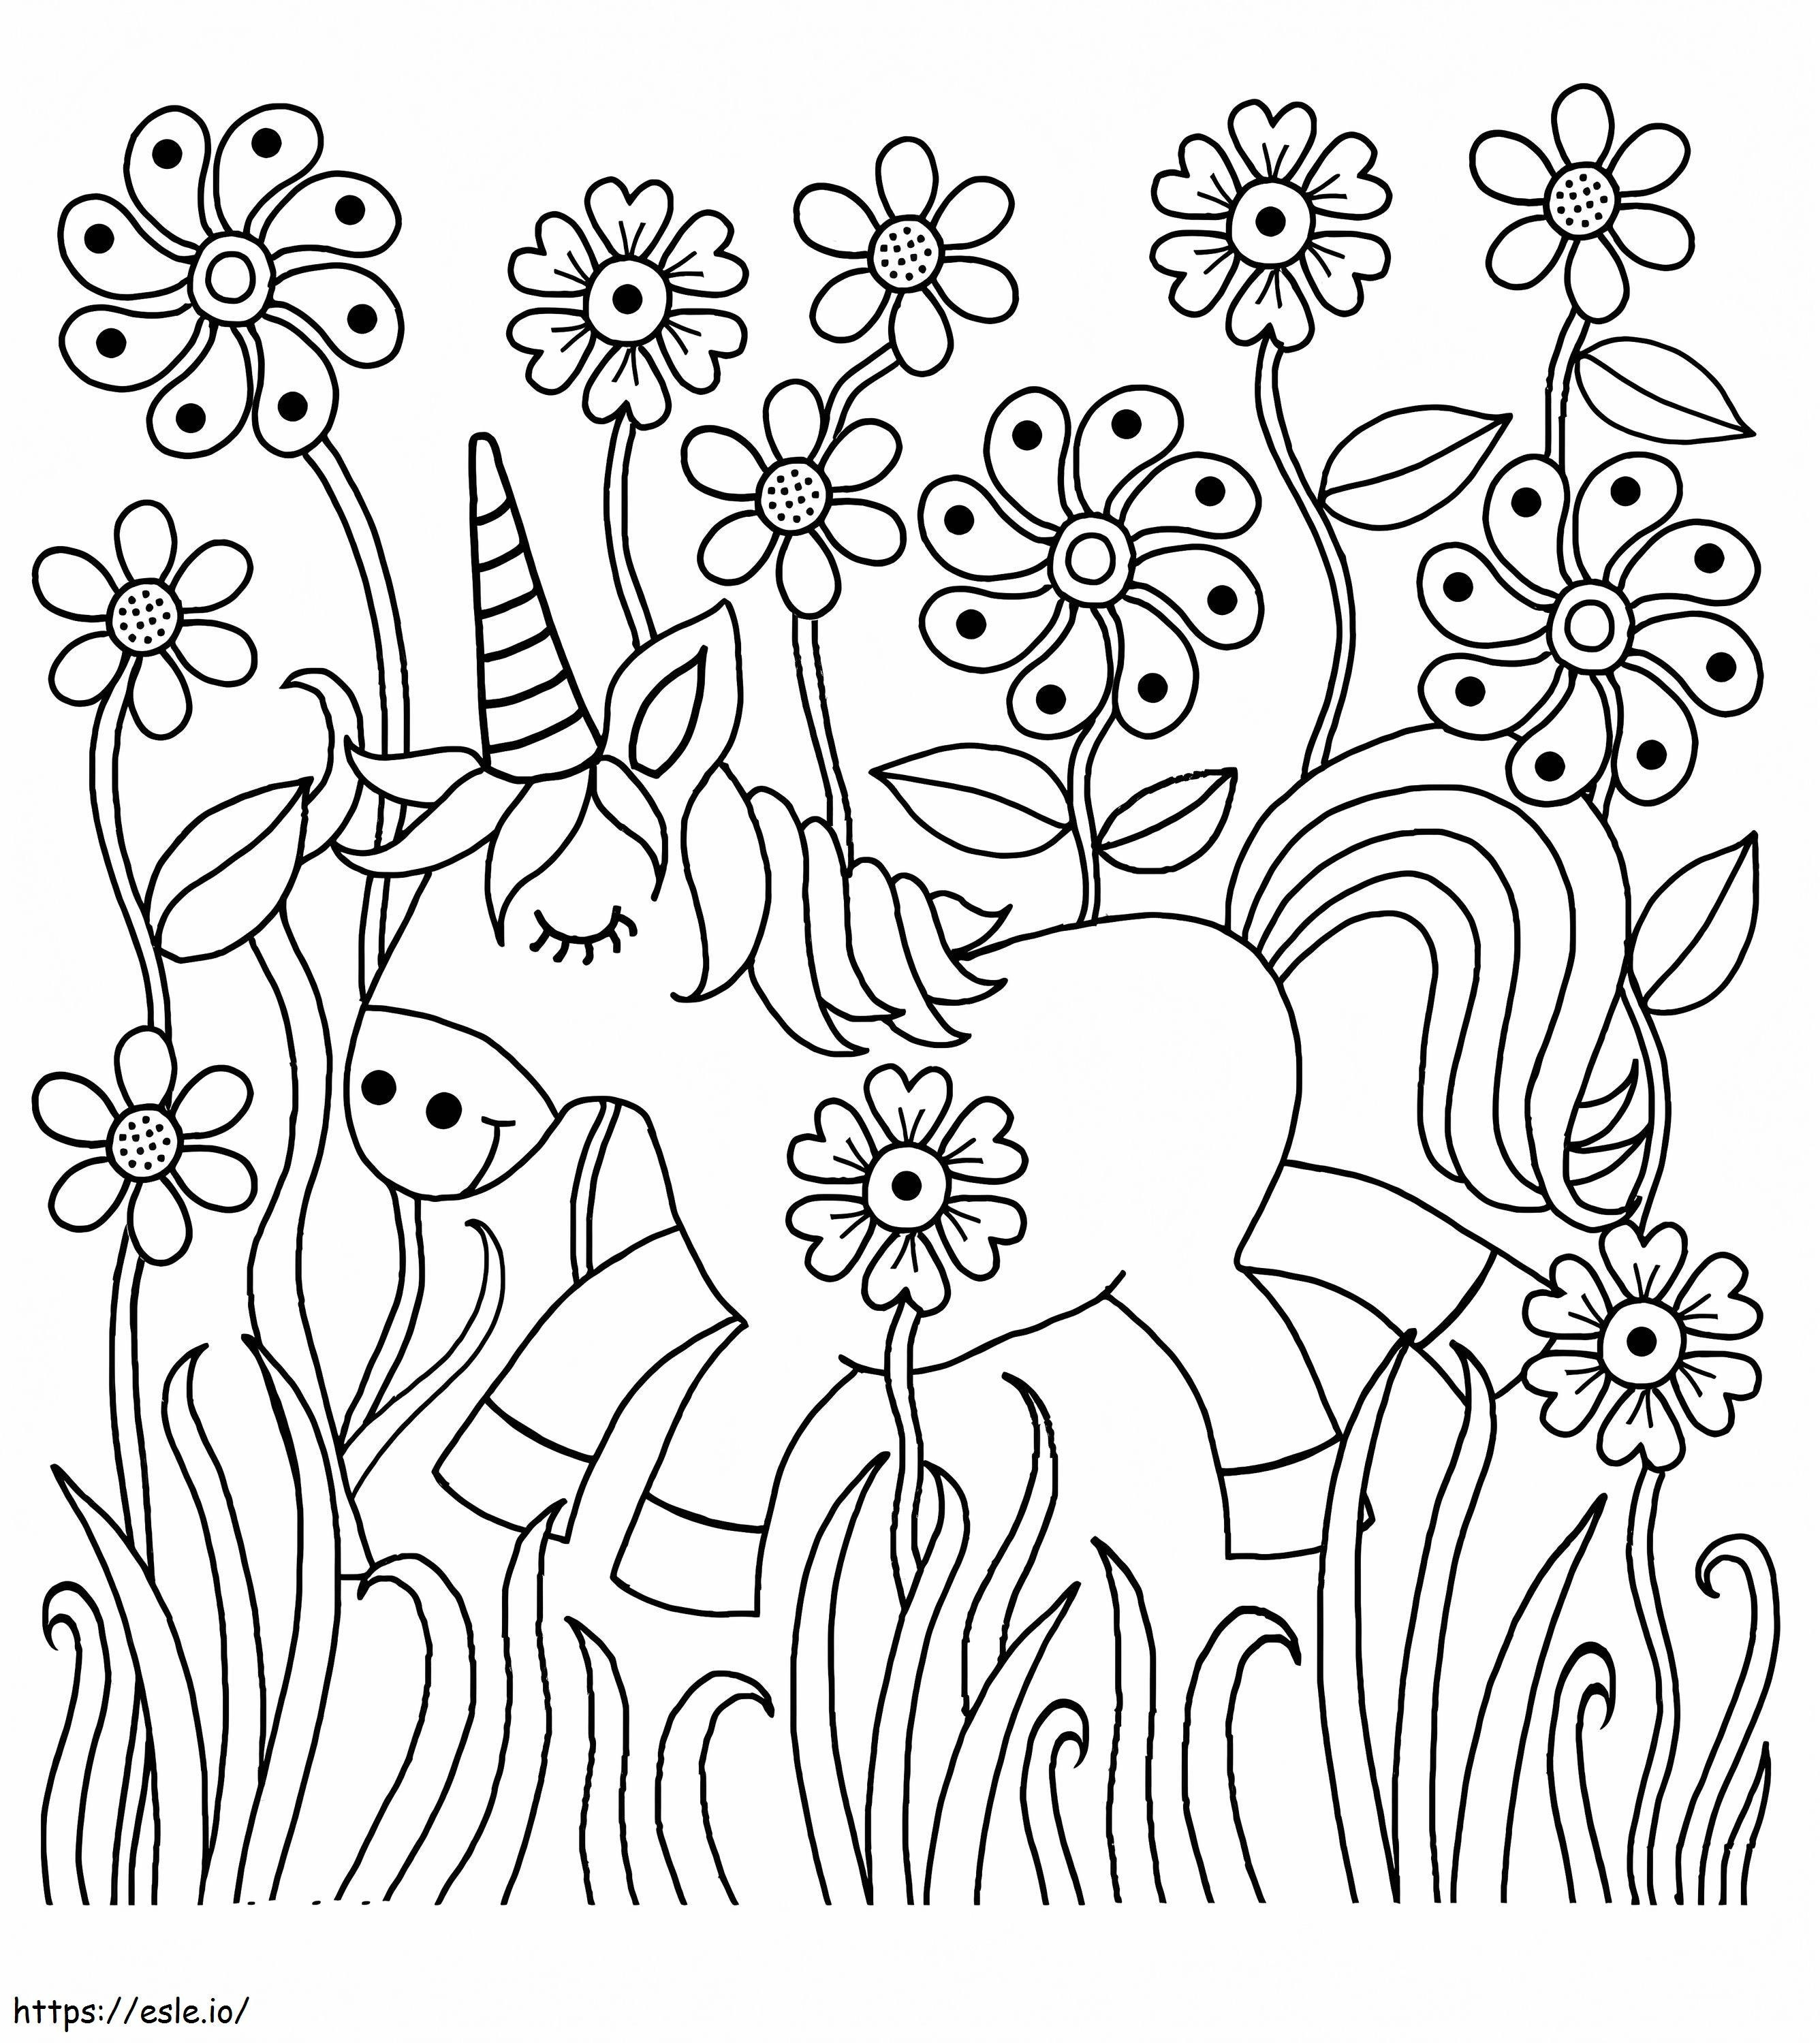 Unicorn In The Garden coloring page